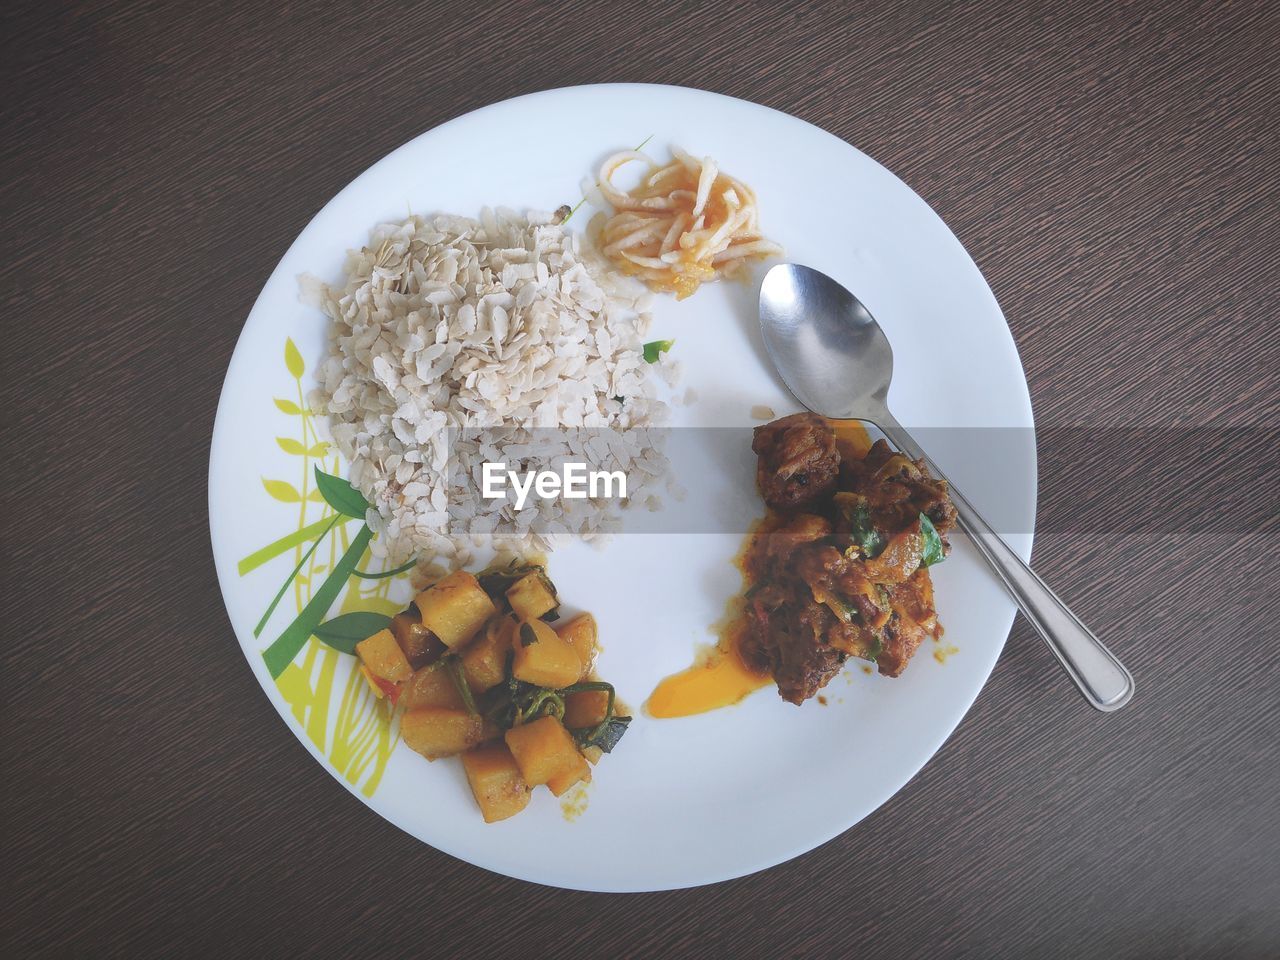 HIGH ANGLE VIEW OF MEAL SERVED IN PLATE